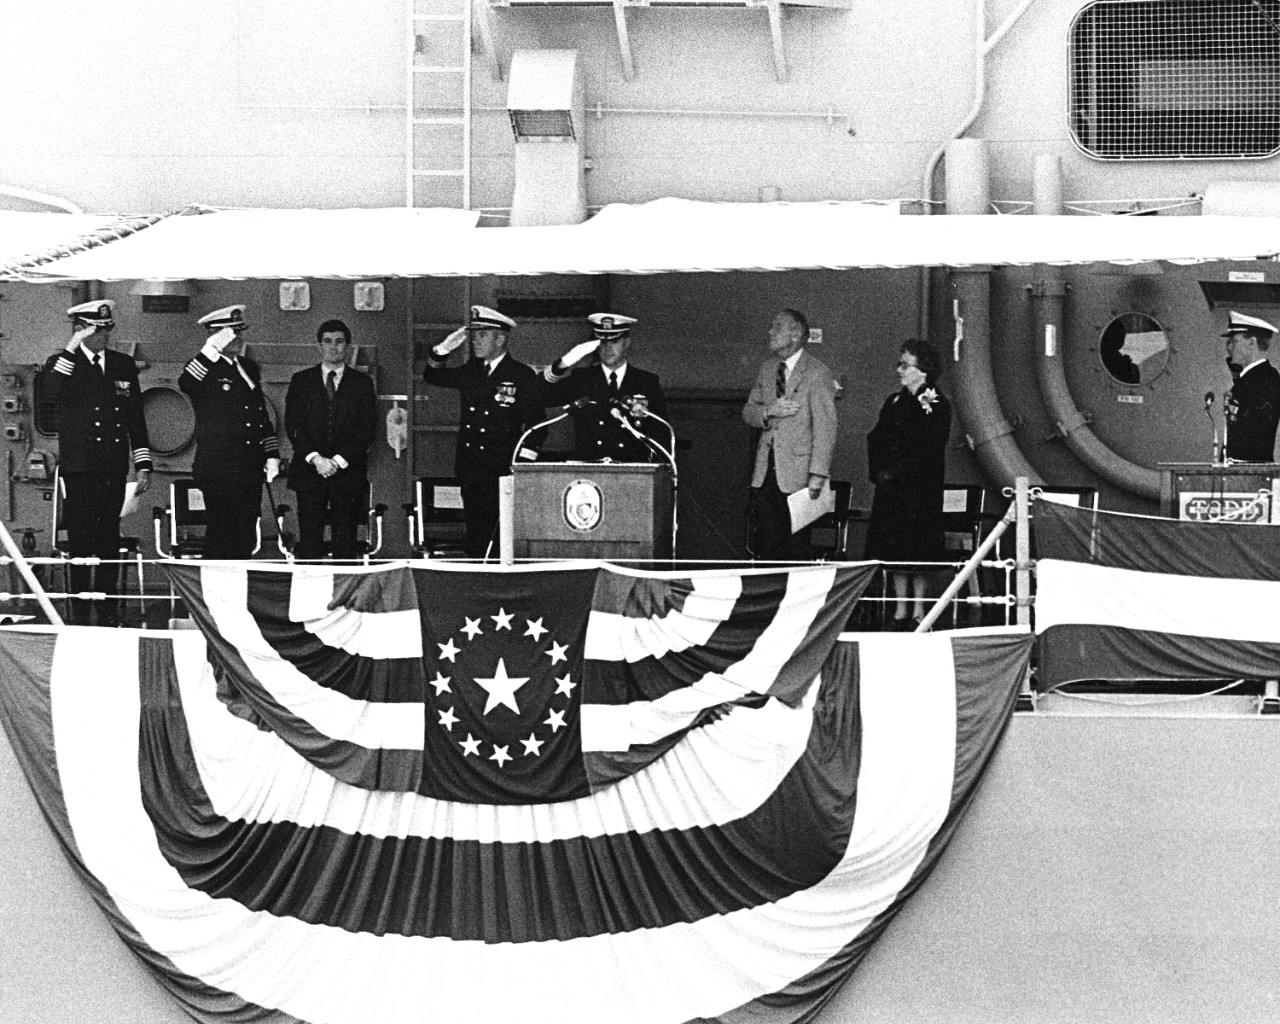 330-CFD-DN-SN-83-11729: USS Stark (FFG-31), 1982.   A view of distinguished guests standing on the speakers platform during the commissioning ceremony for the guided missile frigate USS Stark (FFG-31) taking place at Todd Pacific Shipyards Corporation.   Photographed: October 23, 1982.   U.S. Navy Photograph, now in the collections of the U.S. National Archives.